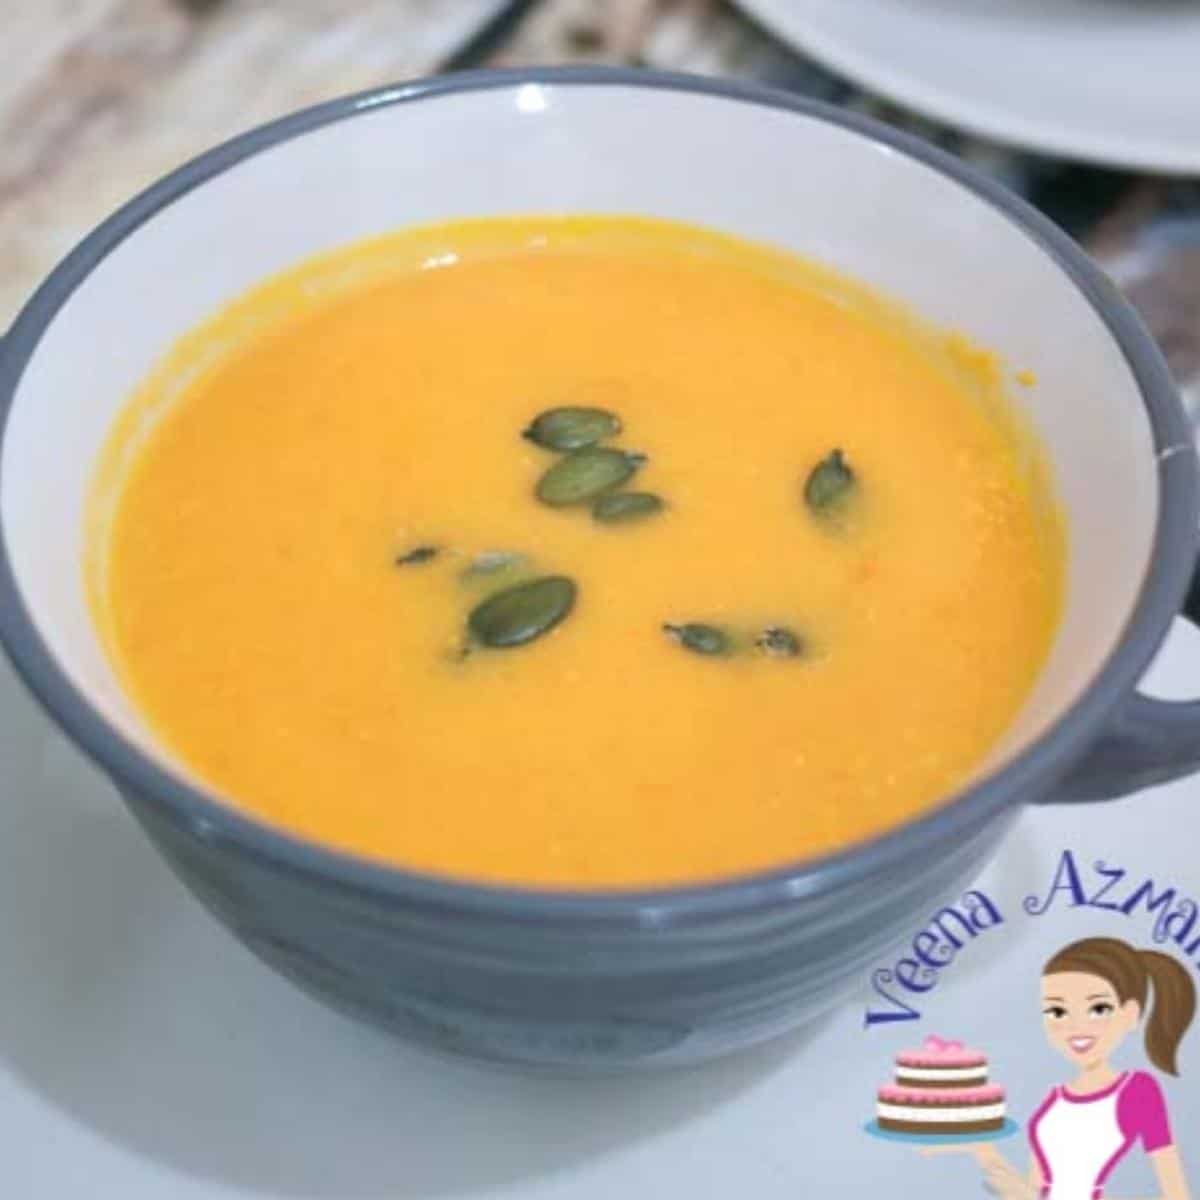 A bowl with soup made with pumpkins.